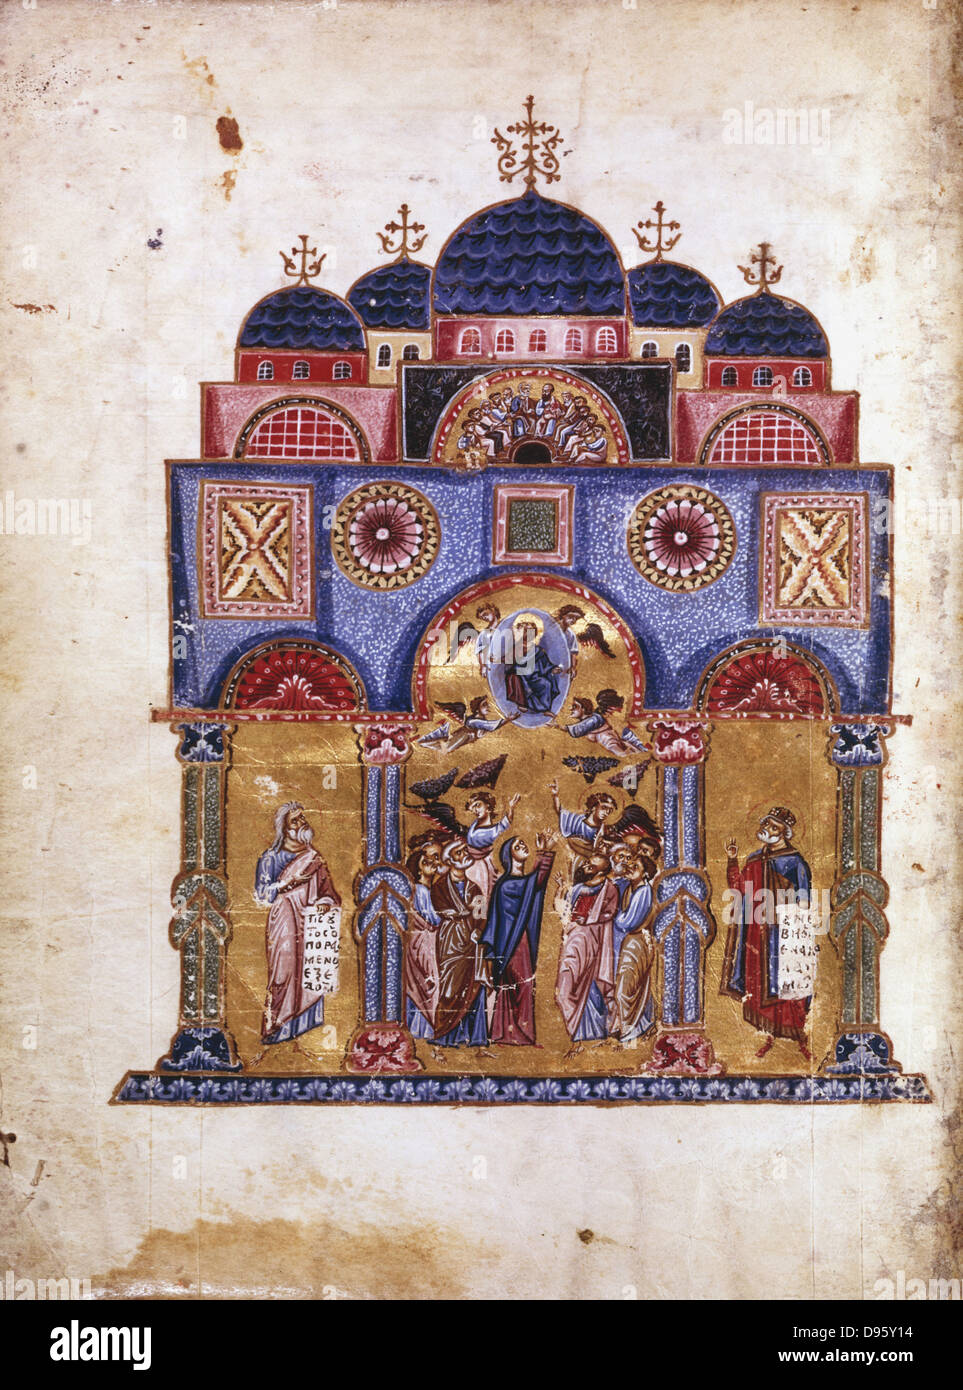 Byzantine art. The Monk James (James of Kokkinobaphos) Homilies on the Virgin (12th century). Ascension (centre), David (right, wearing crown) and Isiah (left). Paris, Bibliotheque Nationale. Stock Photo